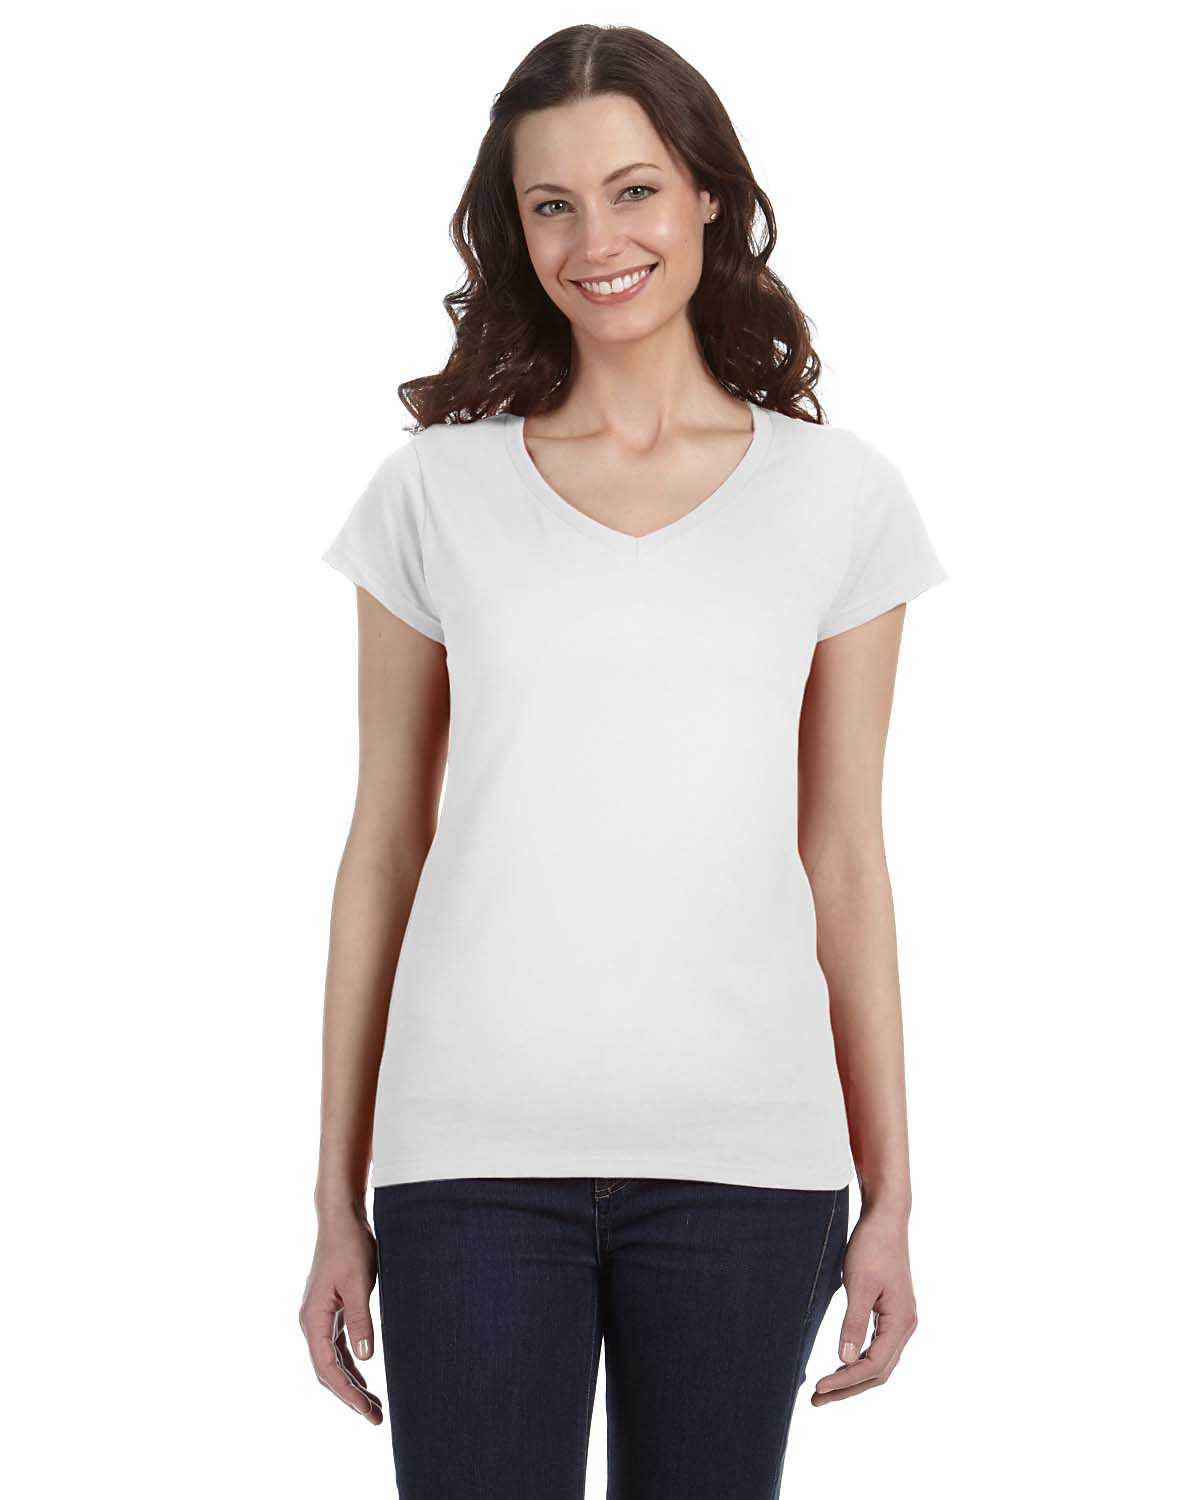 Gildan G64vl Ladies Softstyle 4 5 Oz Fitted V Neck T